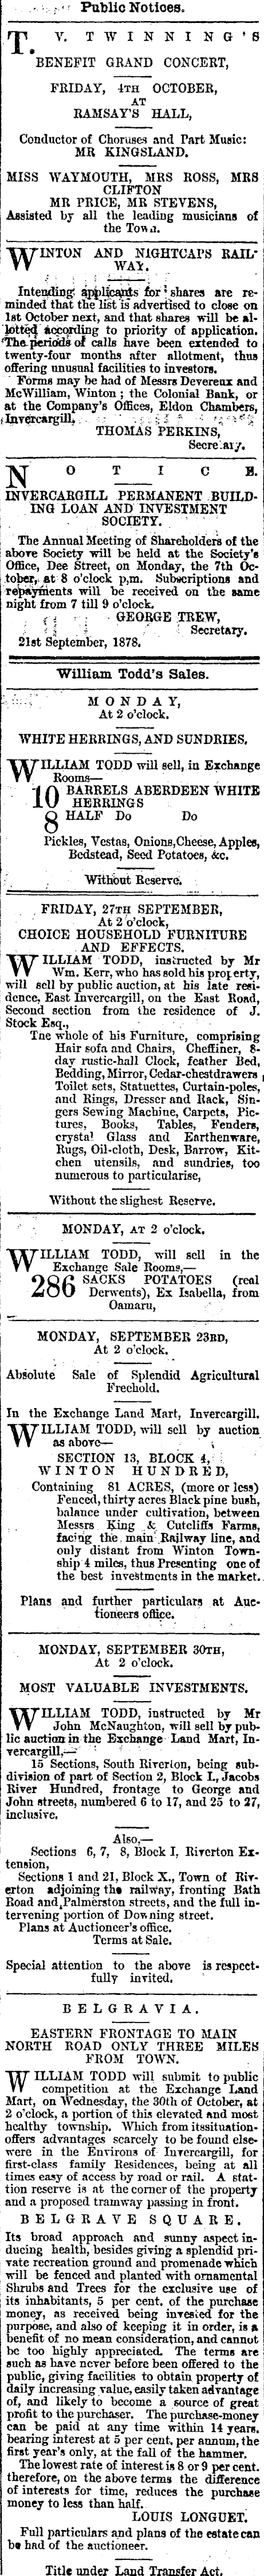 Papers Past Newspapers Southland Times 23 September 1878 Page 3 Advertisements Column 3